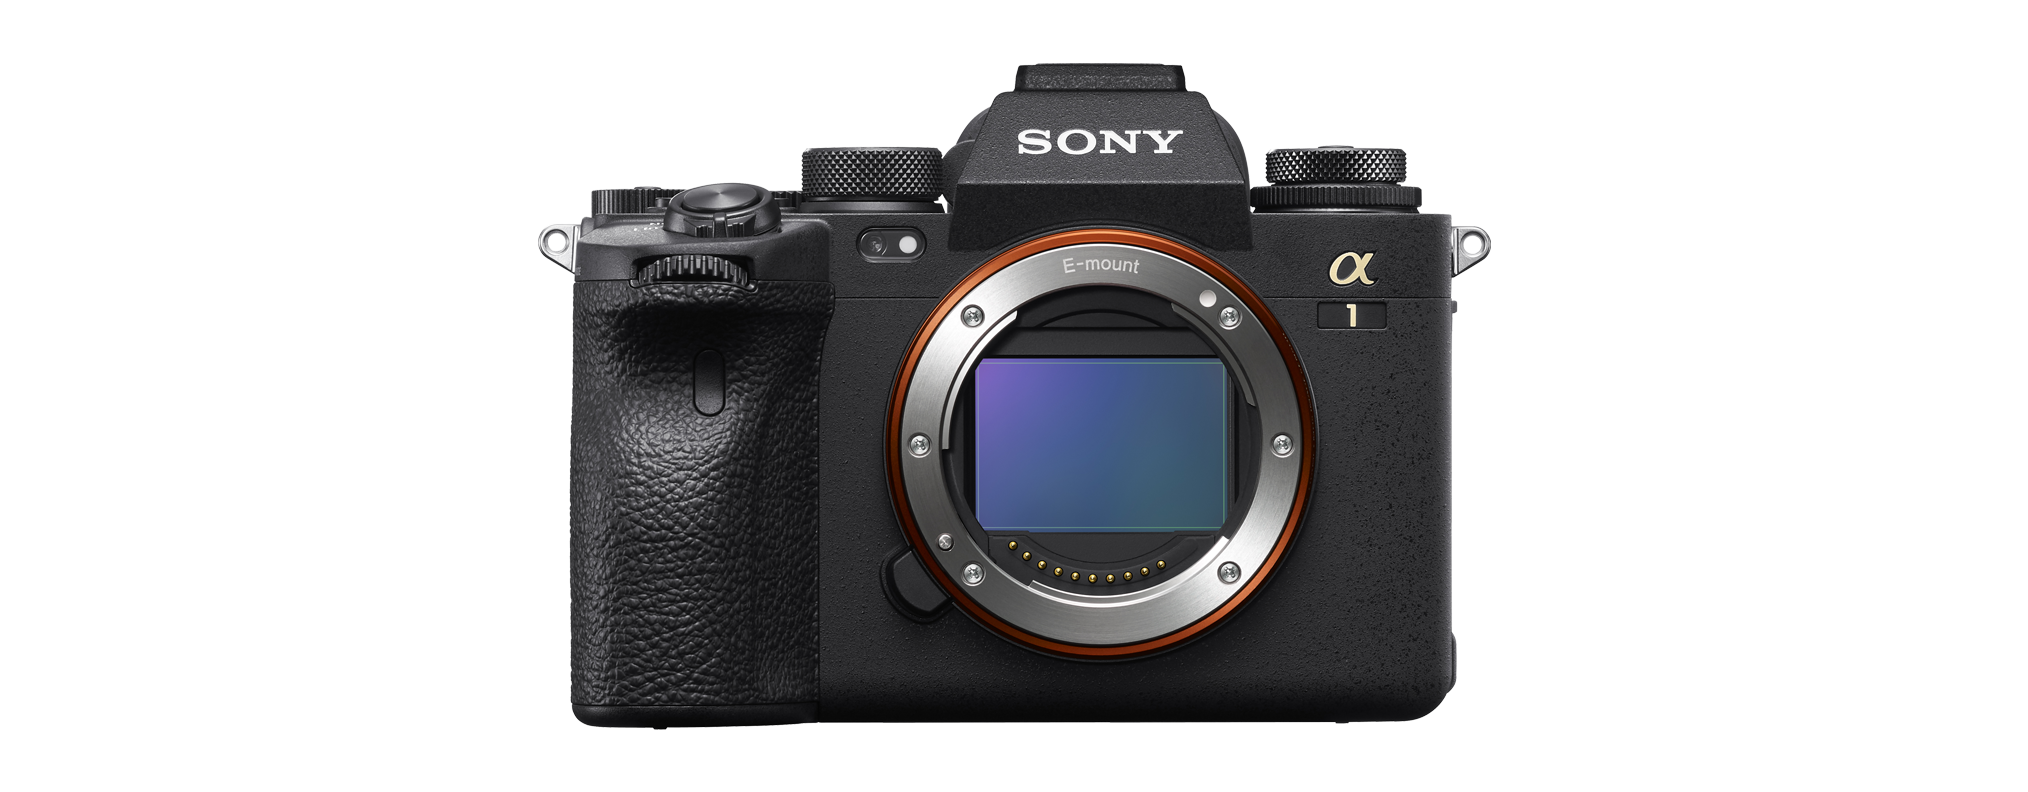 Sony Alpha a1 is one of the best cameras for wedding photographers